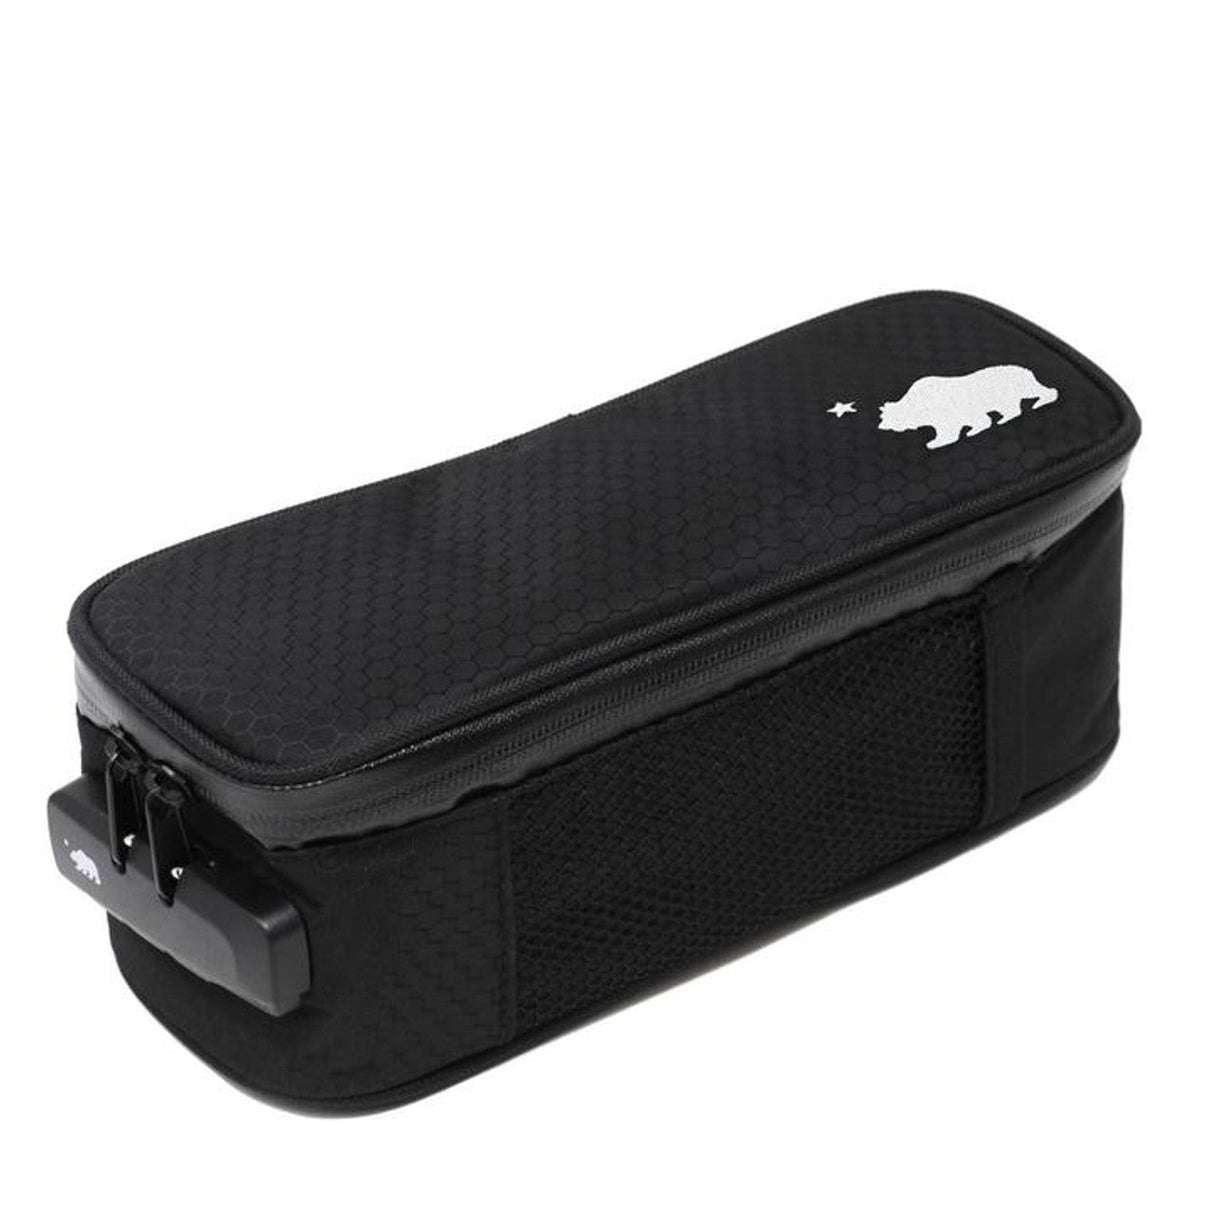 Cali Crusher Soft Case Small in Black with Smell-Proof Silicone and Zipper Closure